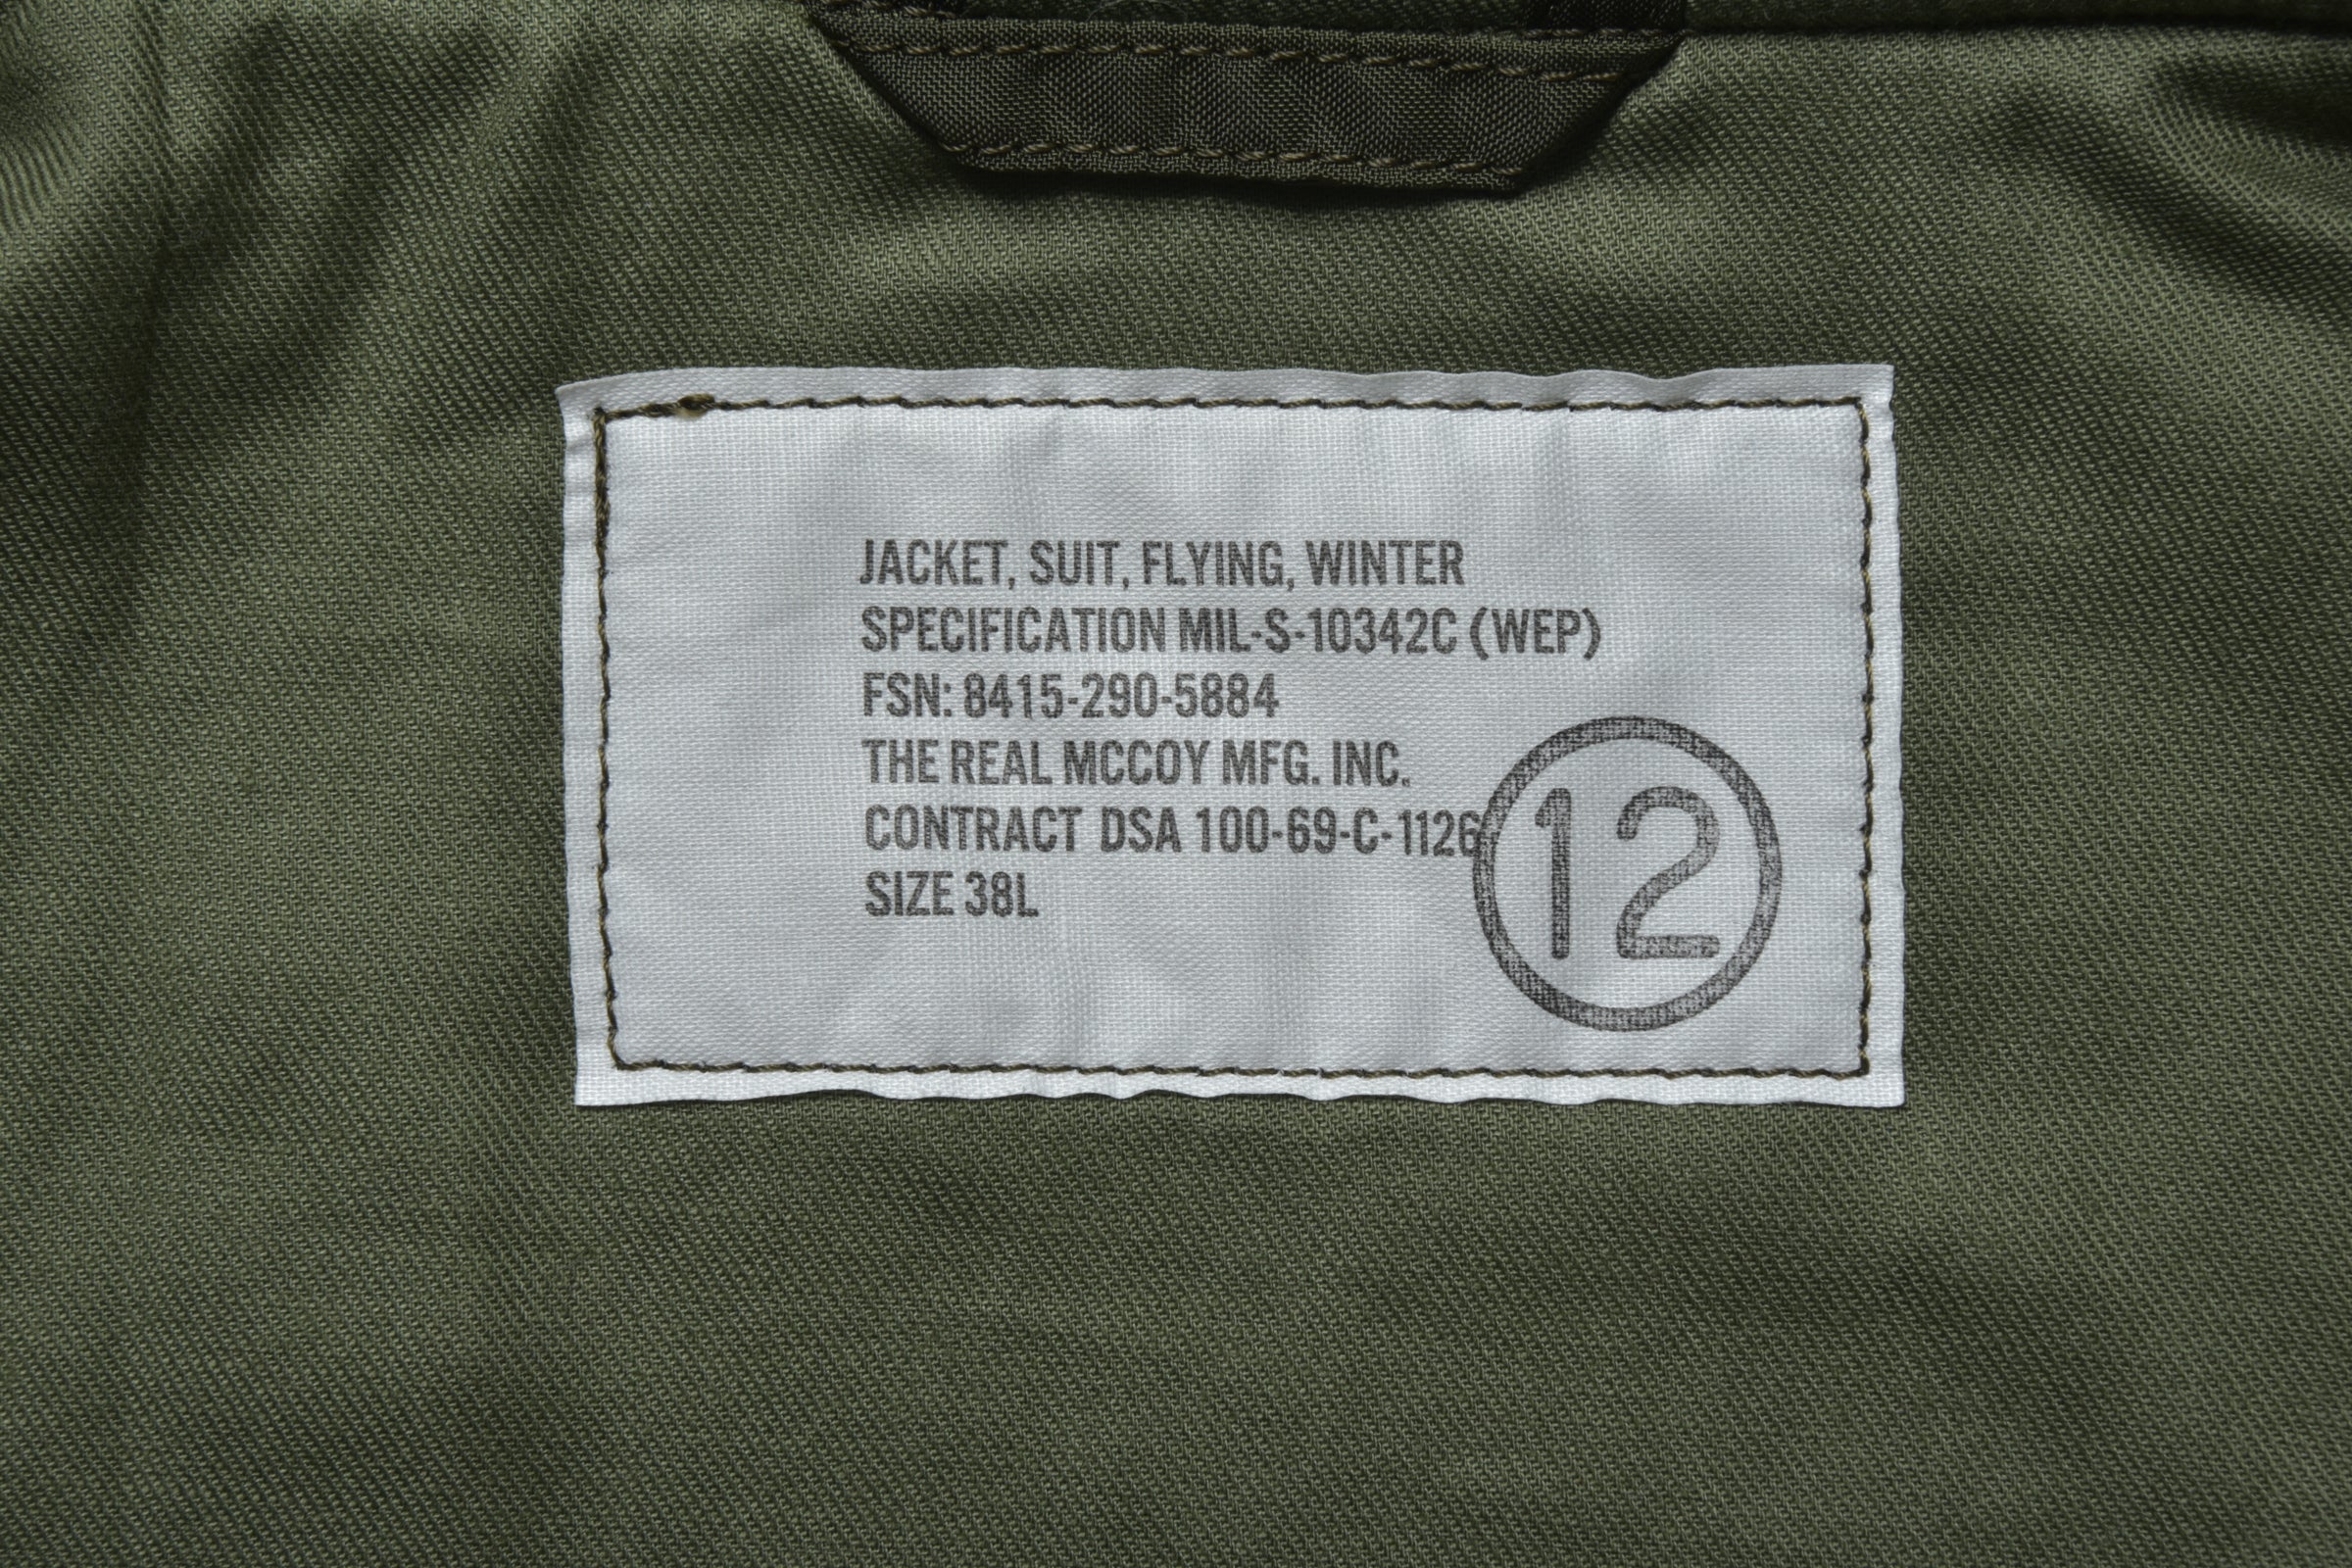 JACKET - SUIT, FLYING, WINTER – The Real McCoy's